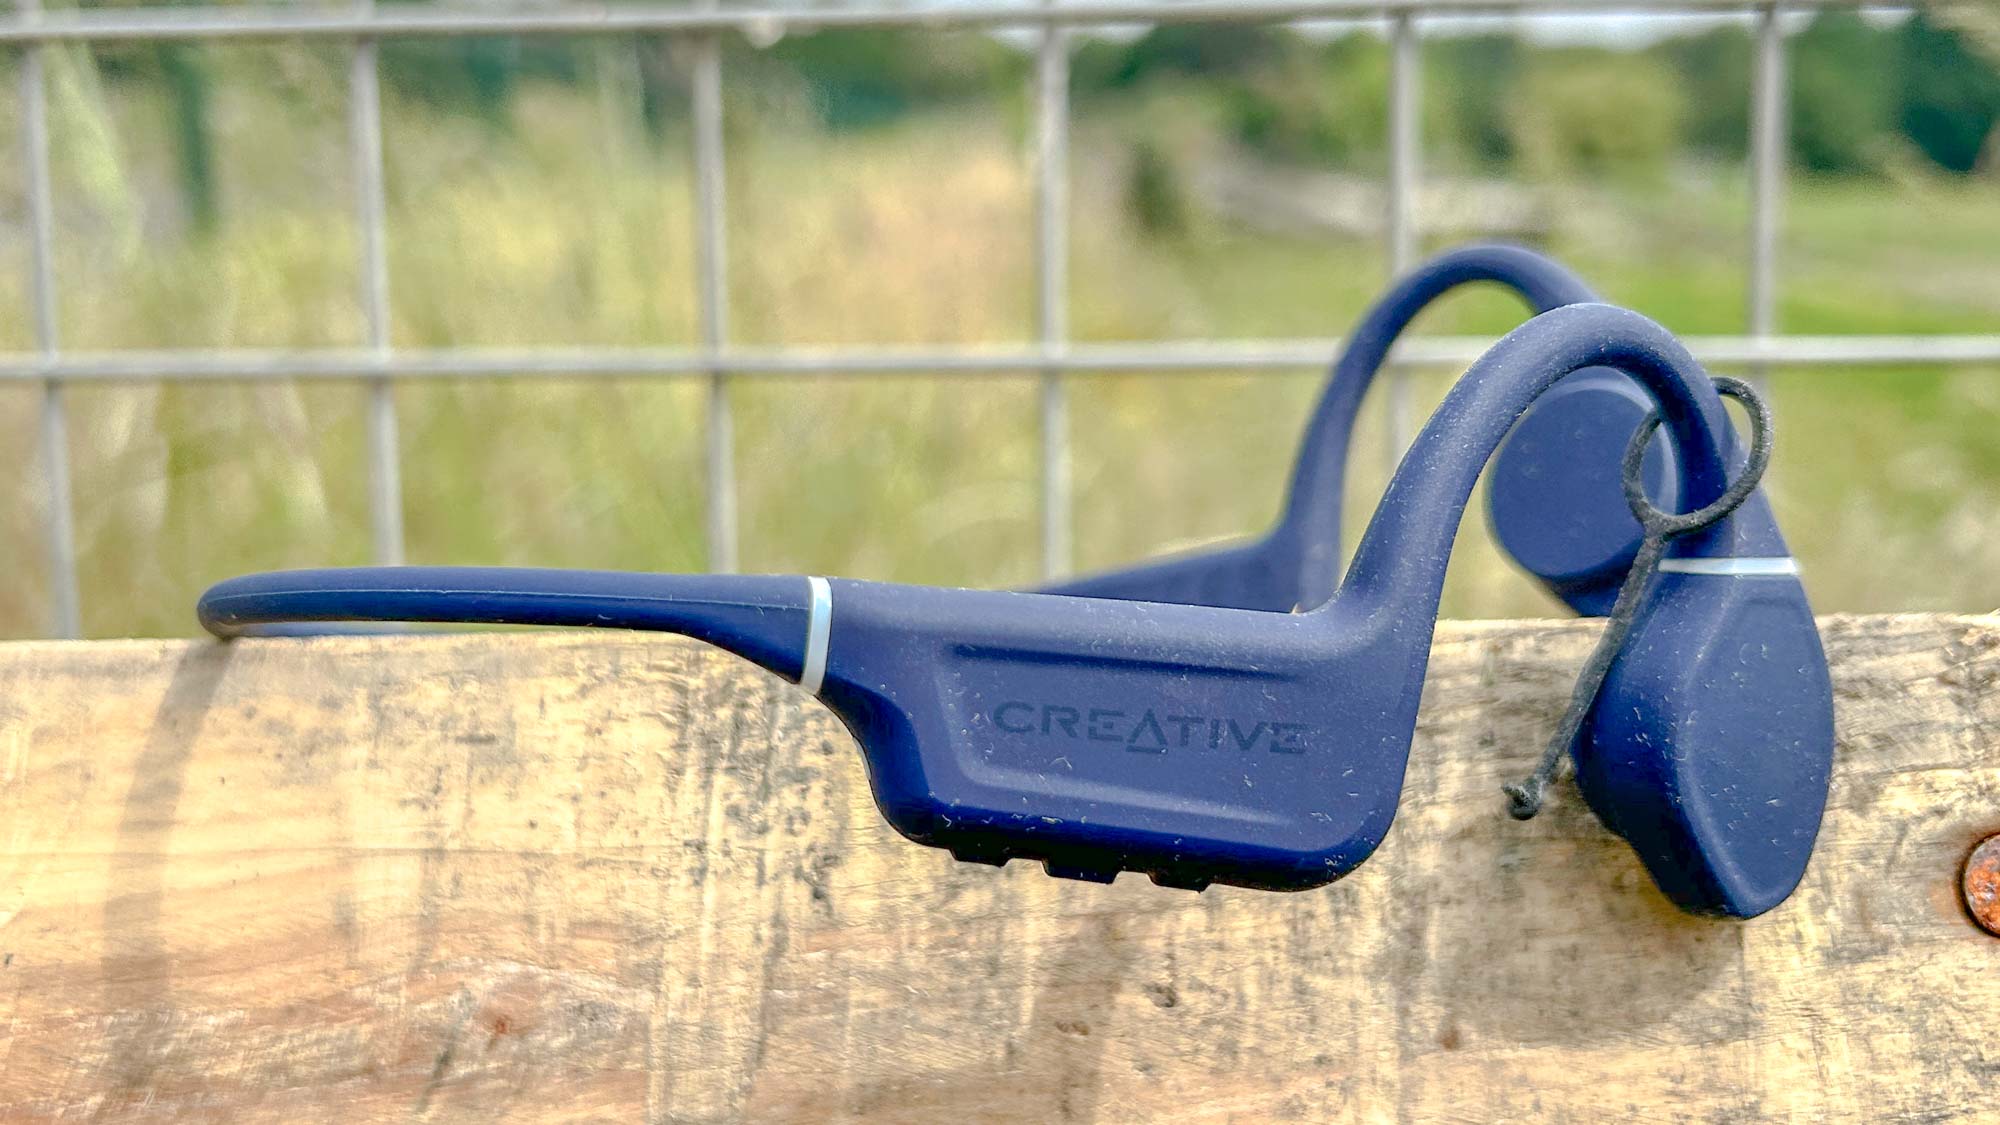 Creative Outlier Free Pro attached to a fence